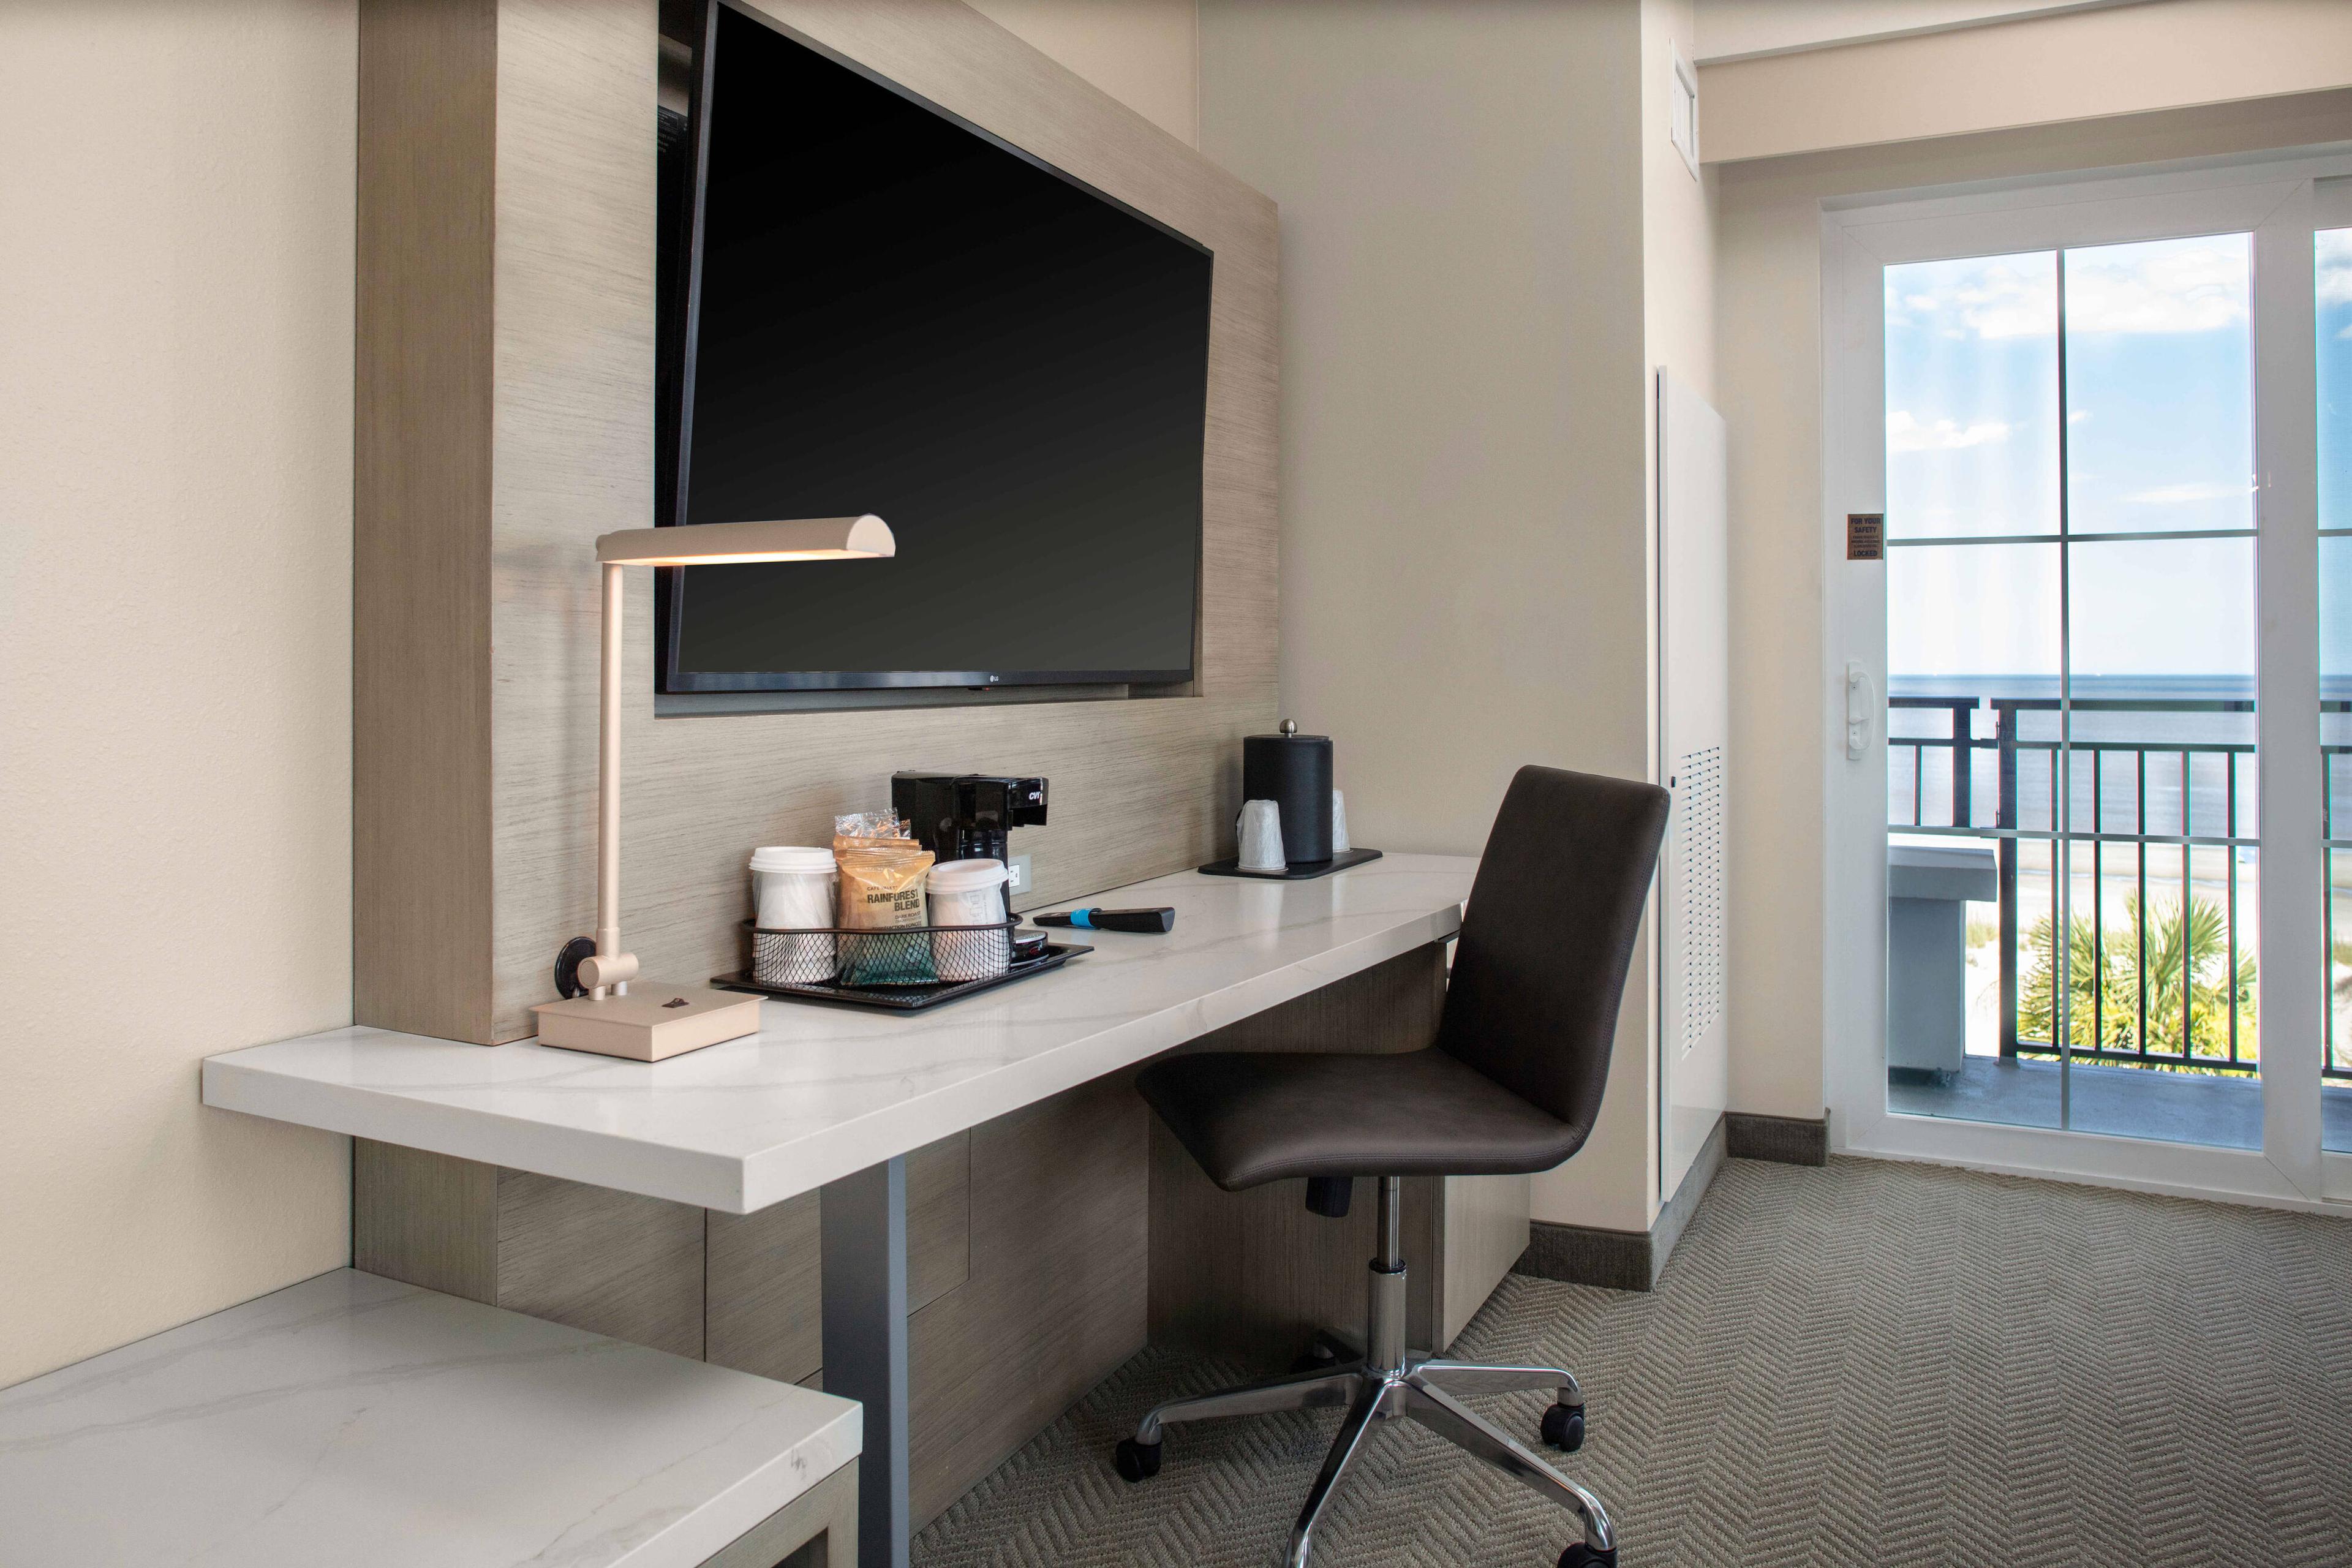 Enjoy the fantastic view while staying connected and working in comfort.